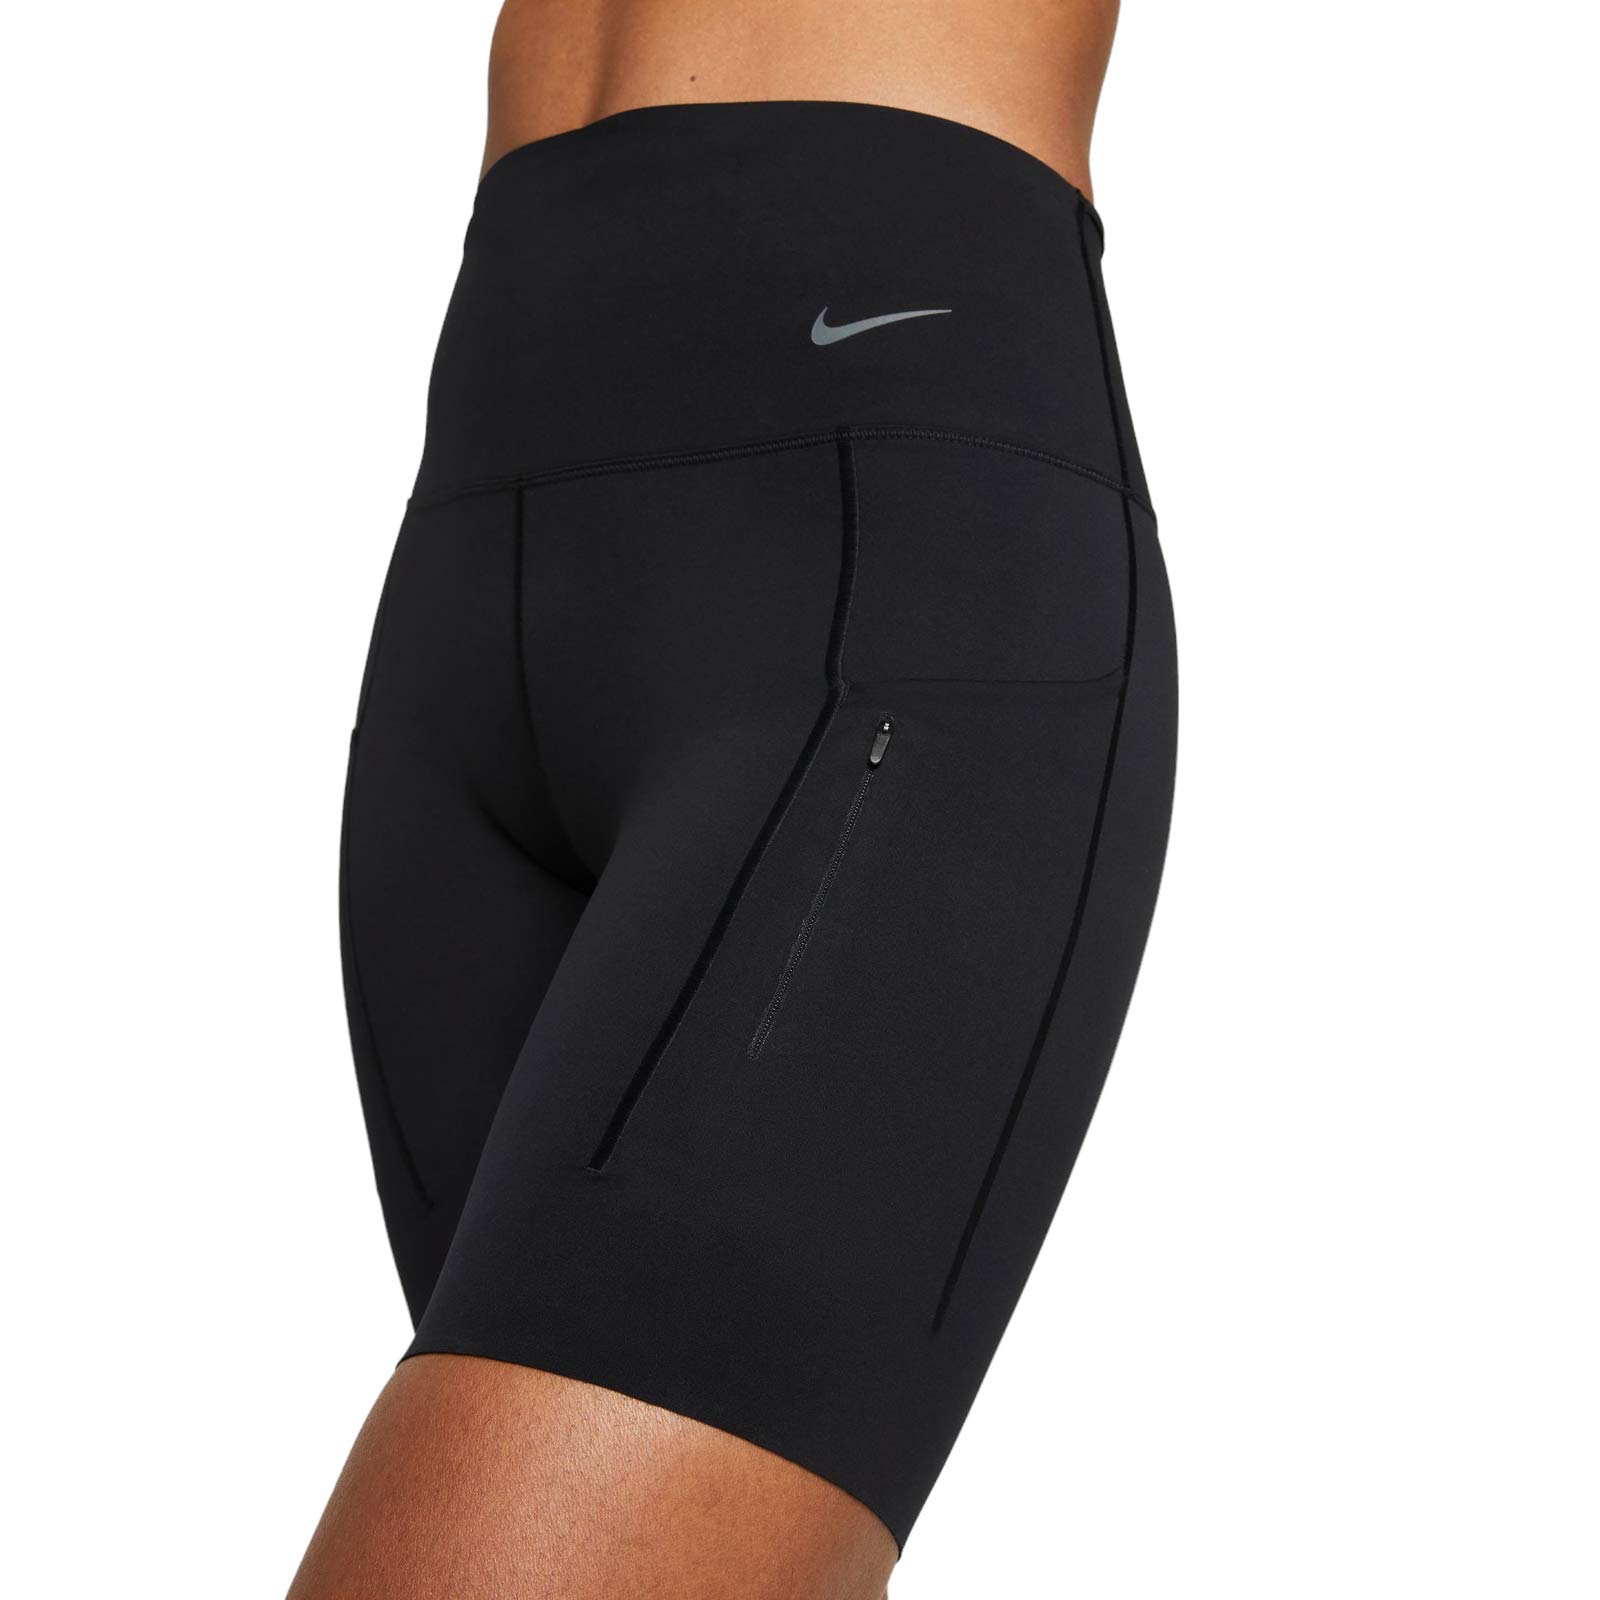 NIKE GO WOMENS FIRM-SUPPORT HIGH-WAISTED 8" BIKER SHORTS WITH POCKETS